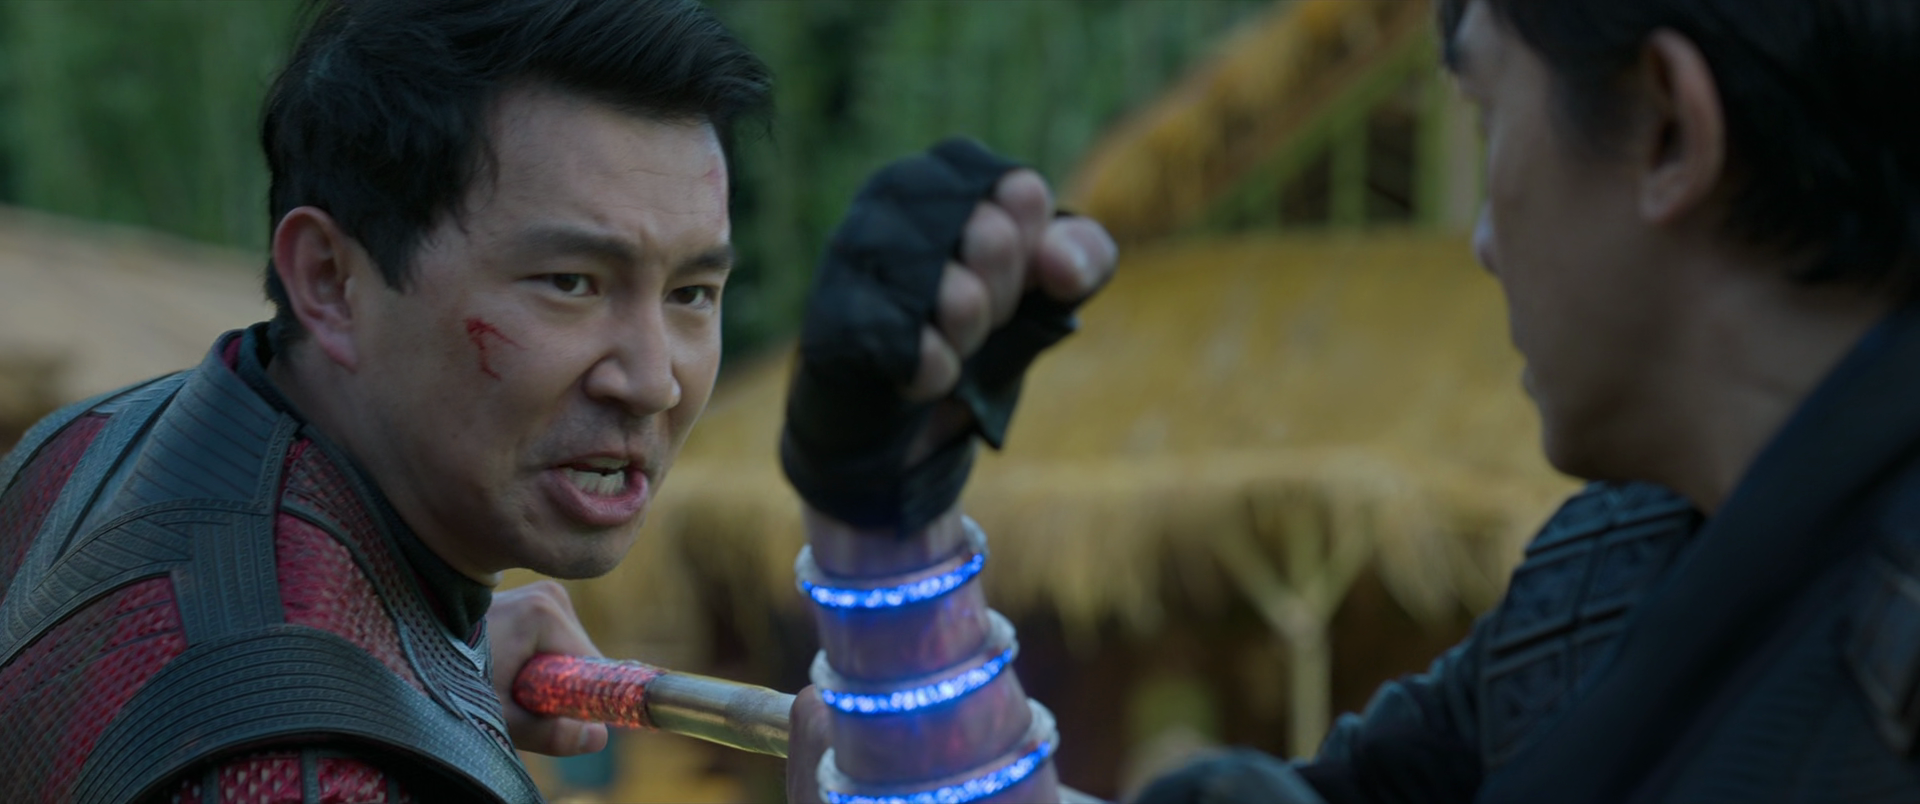 Shang-Chi (Simu Liu) clashes with Wenwu (Tony Leung) in defense of Tao Lo in Shang-Chi and the Legend of the Ten Rings (2021), Marvel Entertainment via Blu-ray